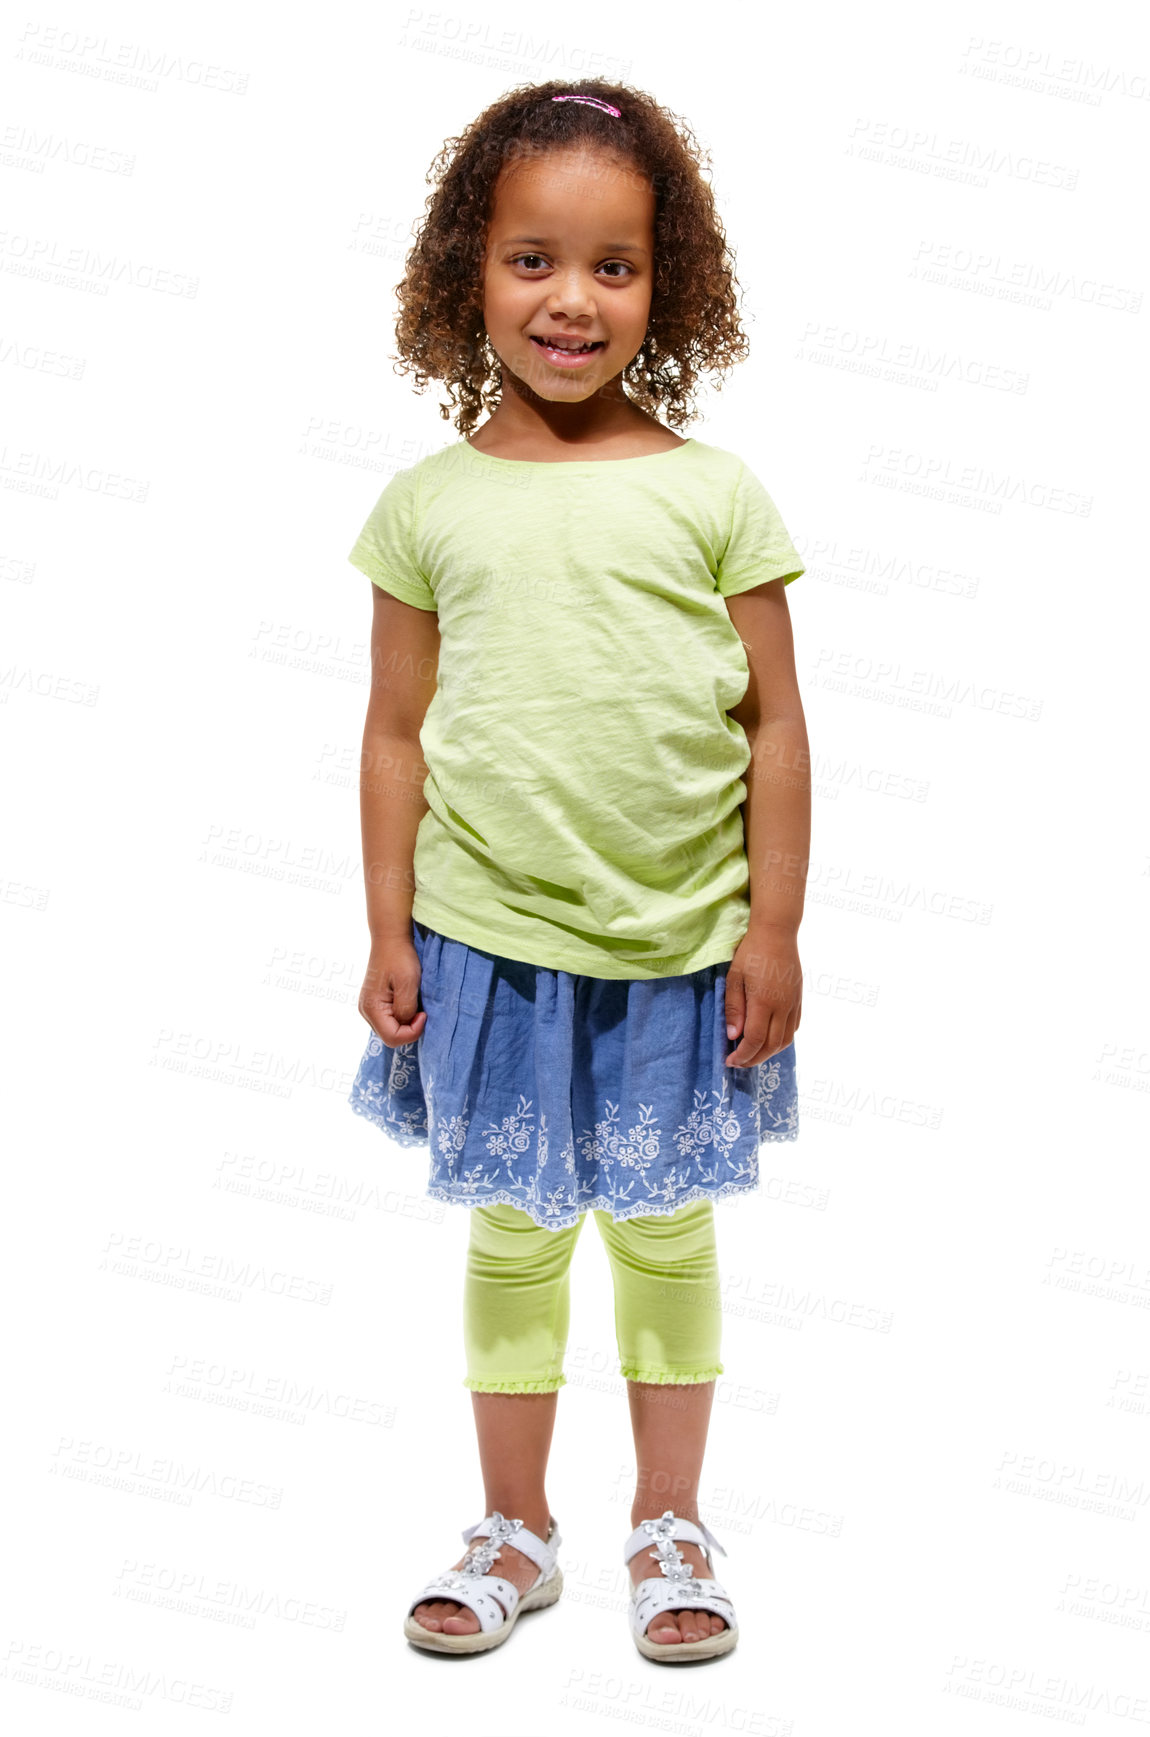 Buy stock photo Cute, proud child and portrait of young girl in a studio with happiness and kids fashion. White background, full body and smile of African kid with youth and style feeling confident from clothing